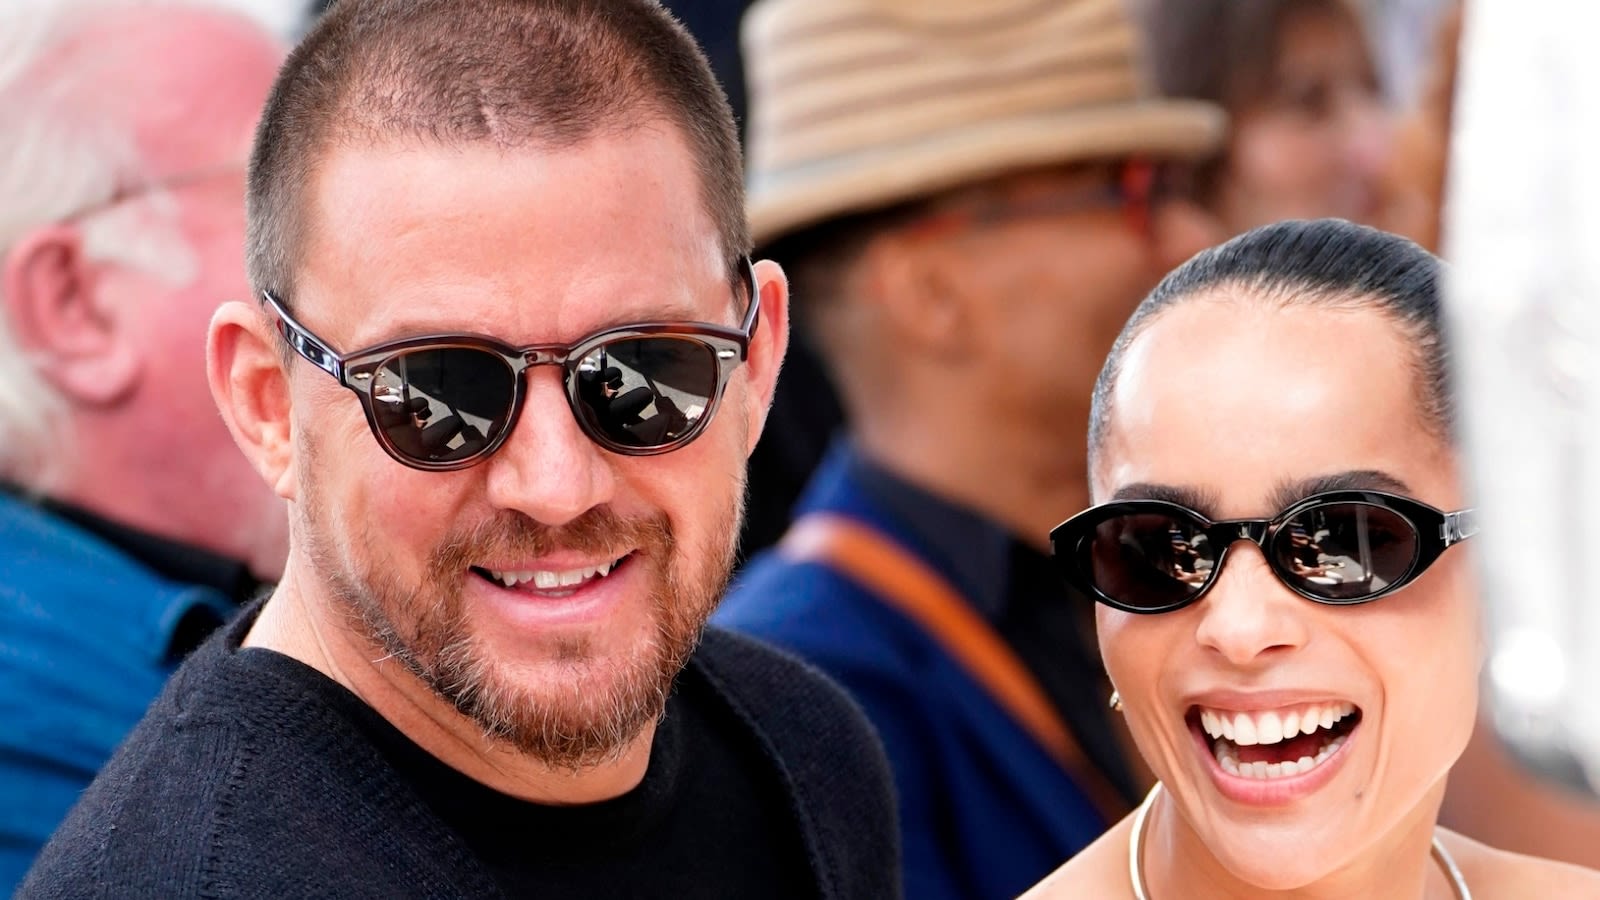 Channing Tatum says working with Zoë Kravitz 'cemented' relationship